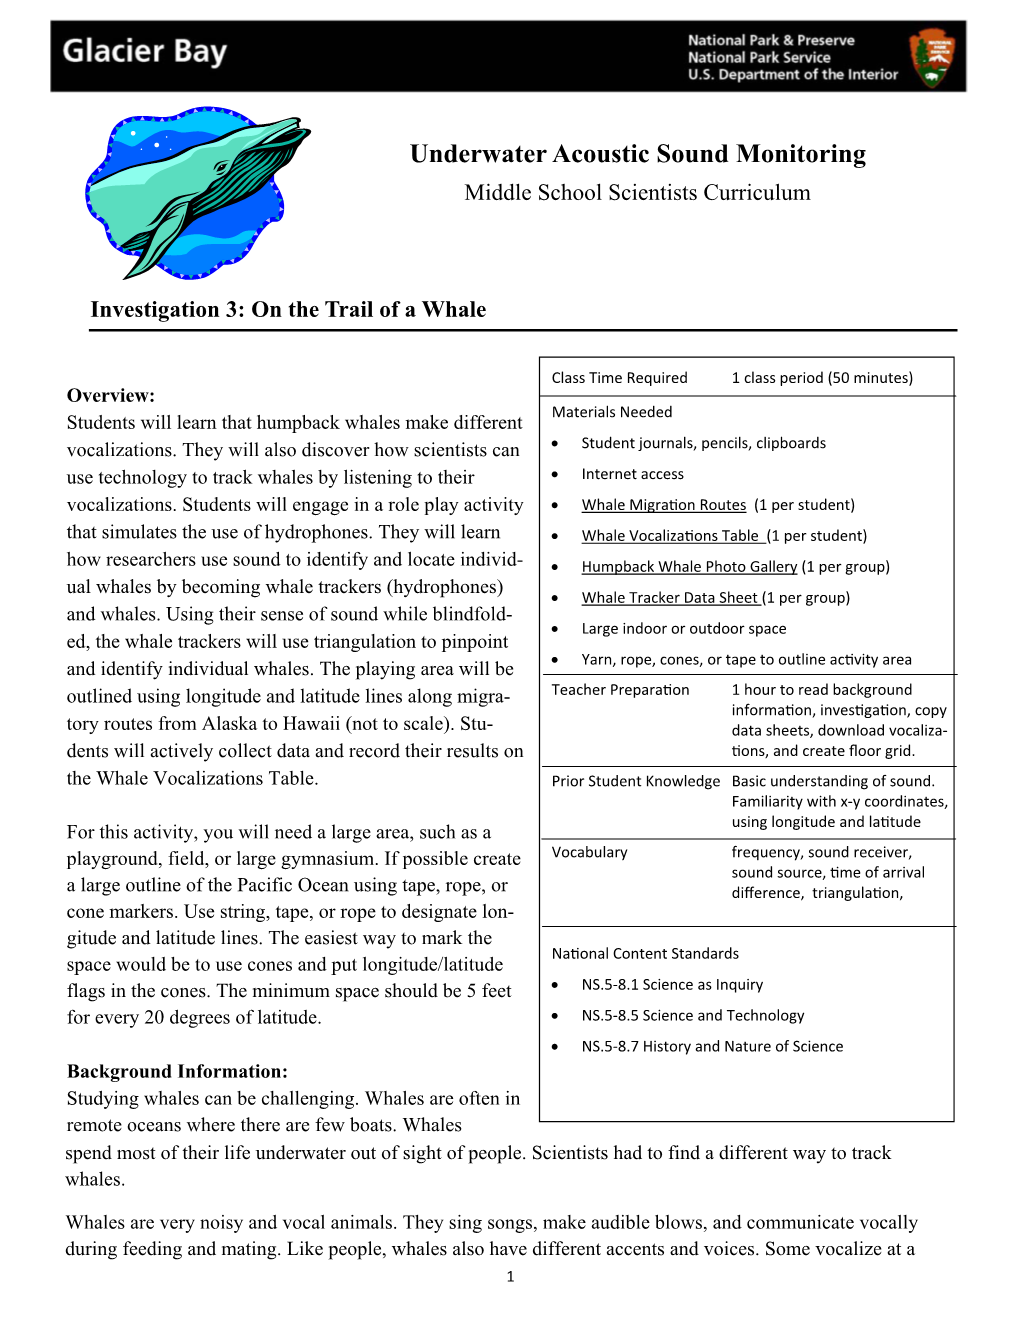 Underwater Acoustic Sound Monitoring Middle School Scientists Curriculum